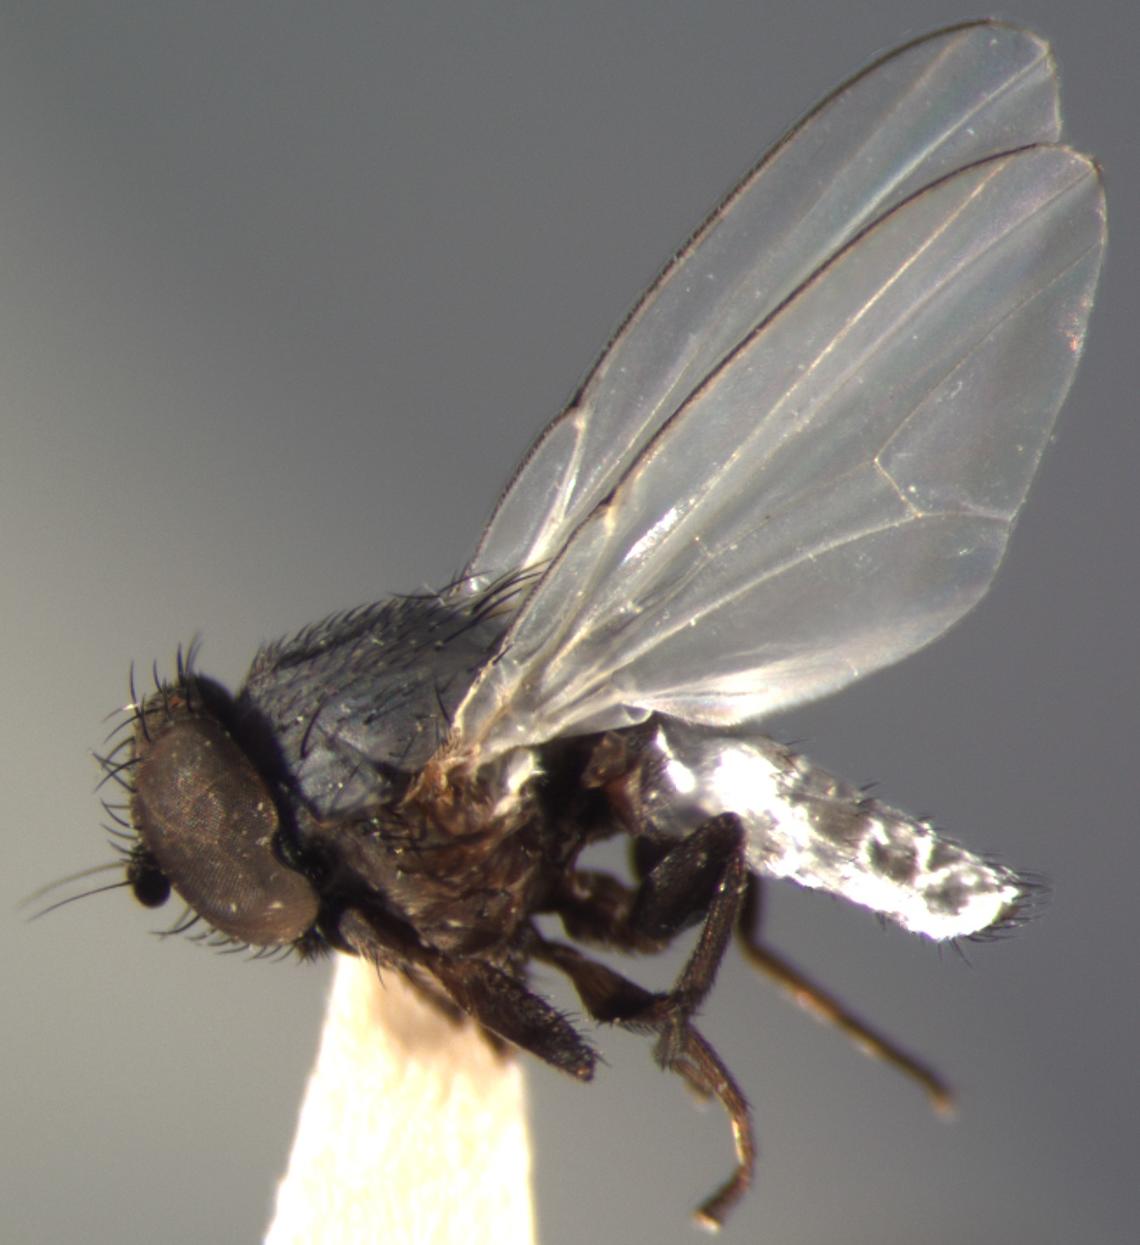 Often tiny and seemingly insignificant, flies comprise 10 to 15 per cent of Kingdom Animalia (the major group of animals) and they play a crucial role in Earth’s ecosystems.